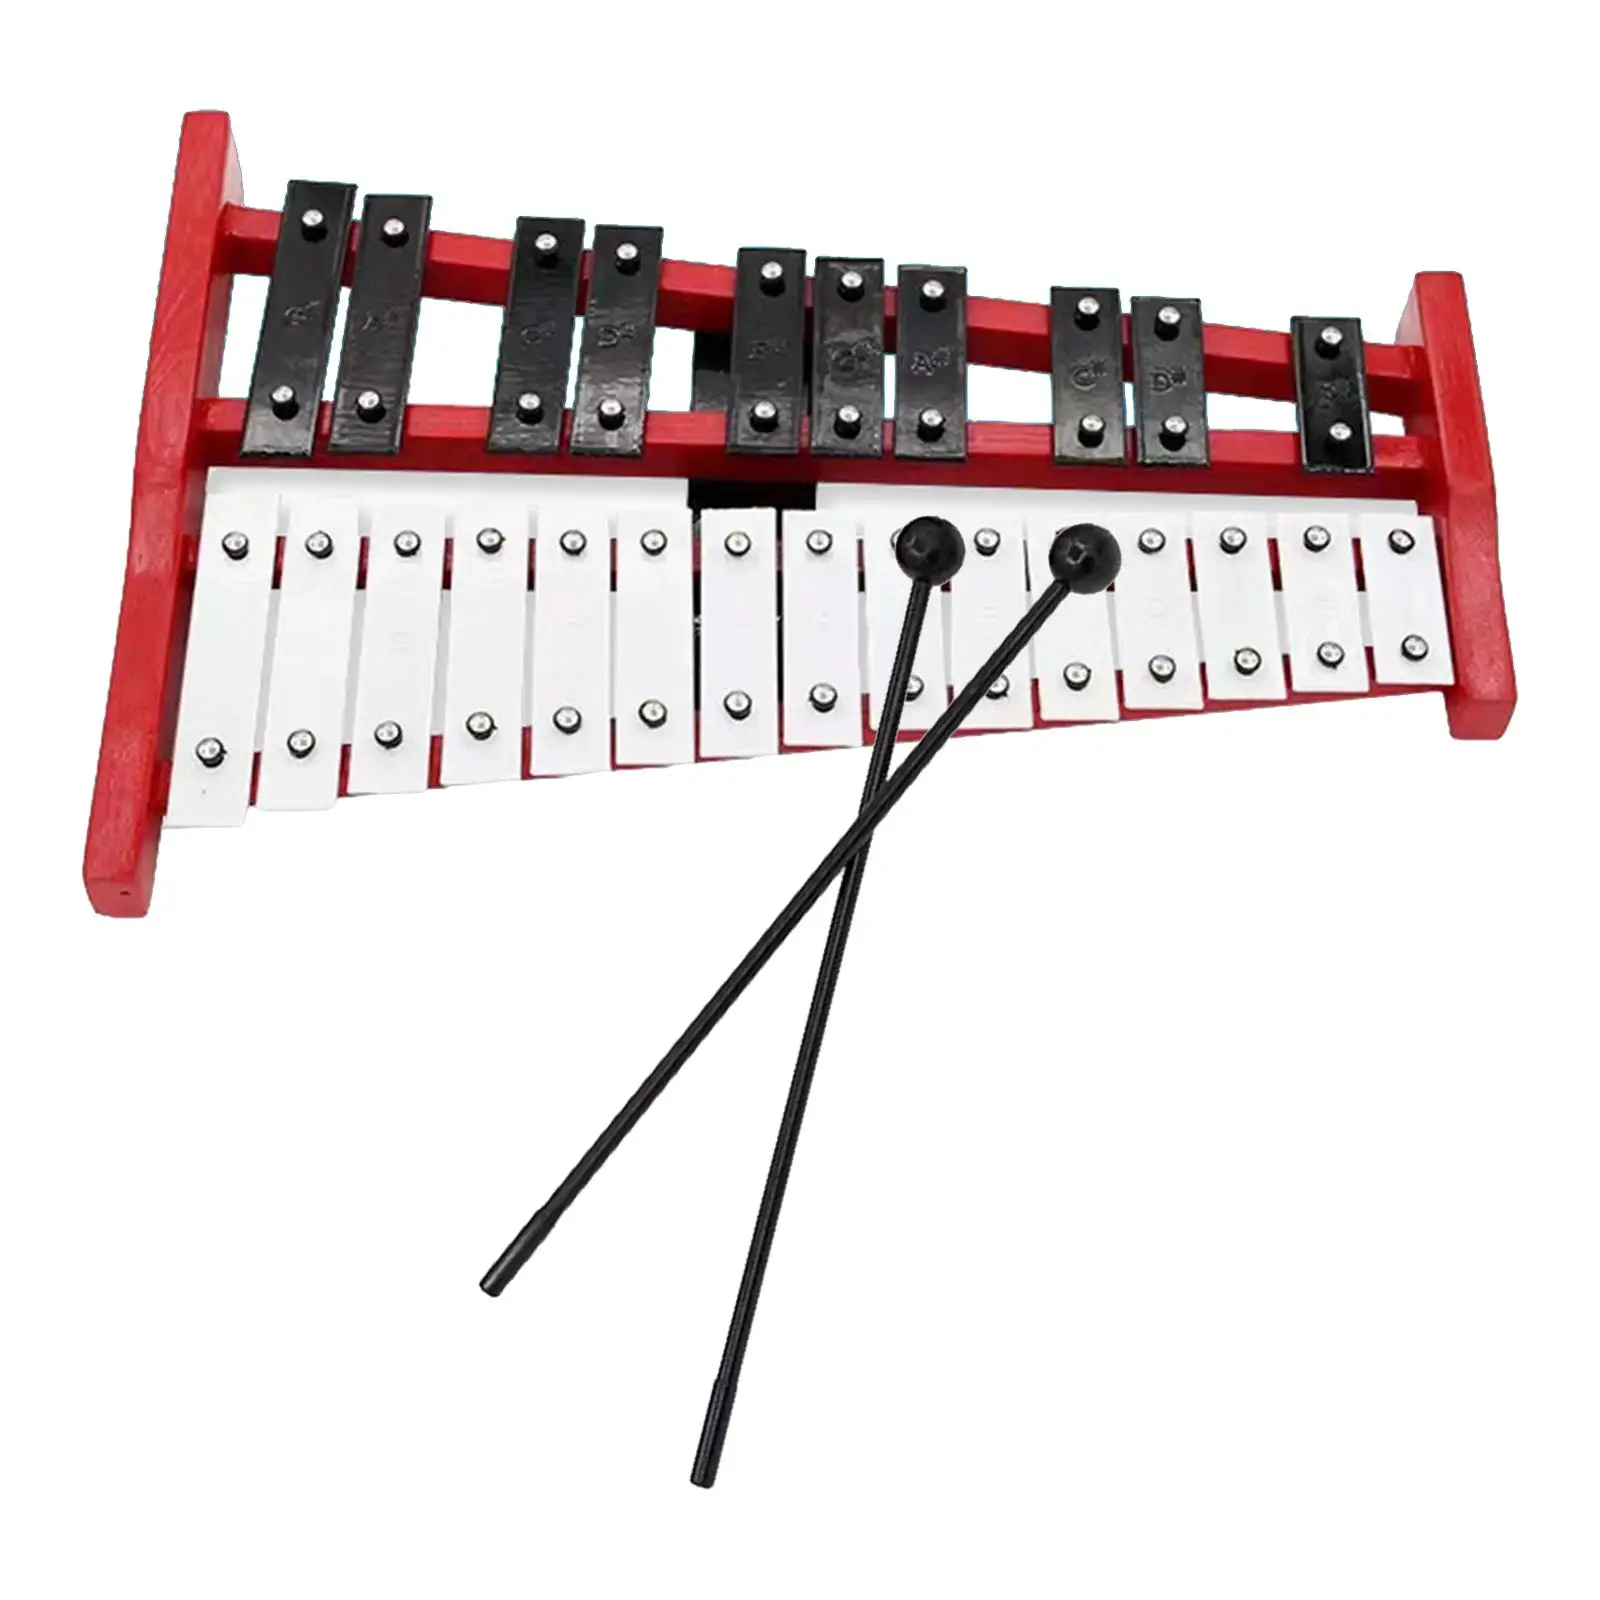 Xylophone for Kids Portable Hand Percussion Percussion Instrument 25 Note for Home School Orchestras Music Lessons Event Outside